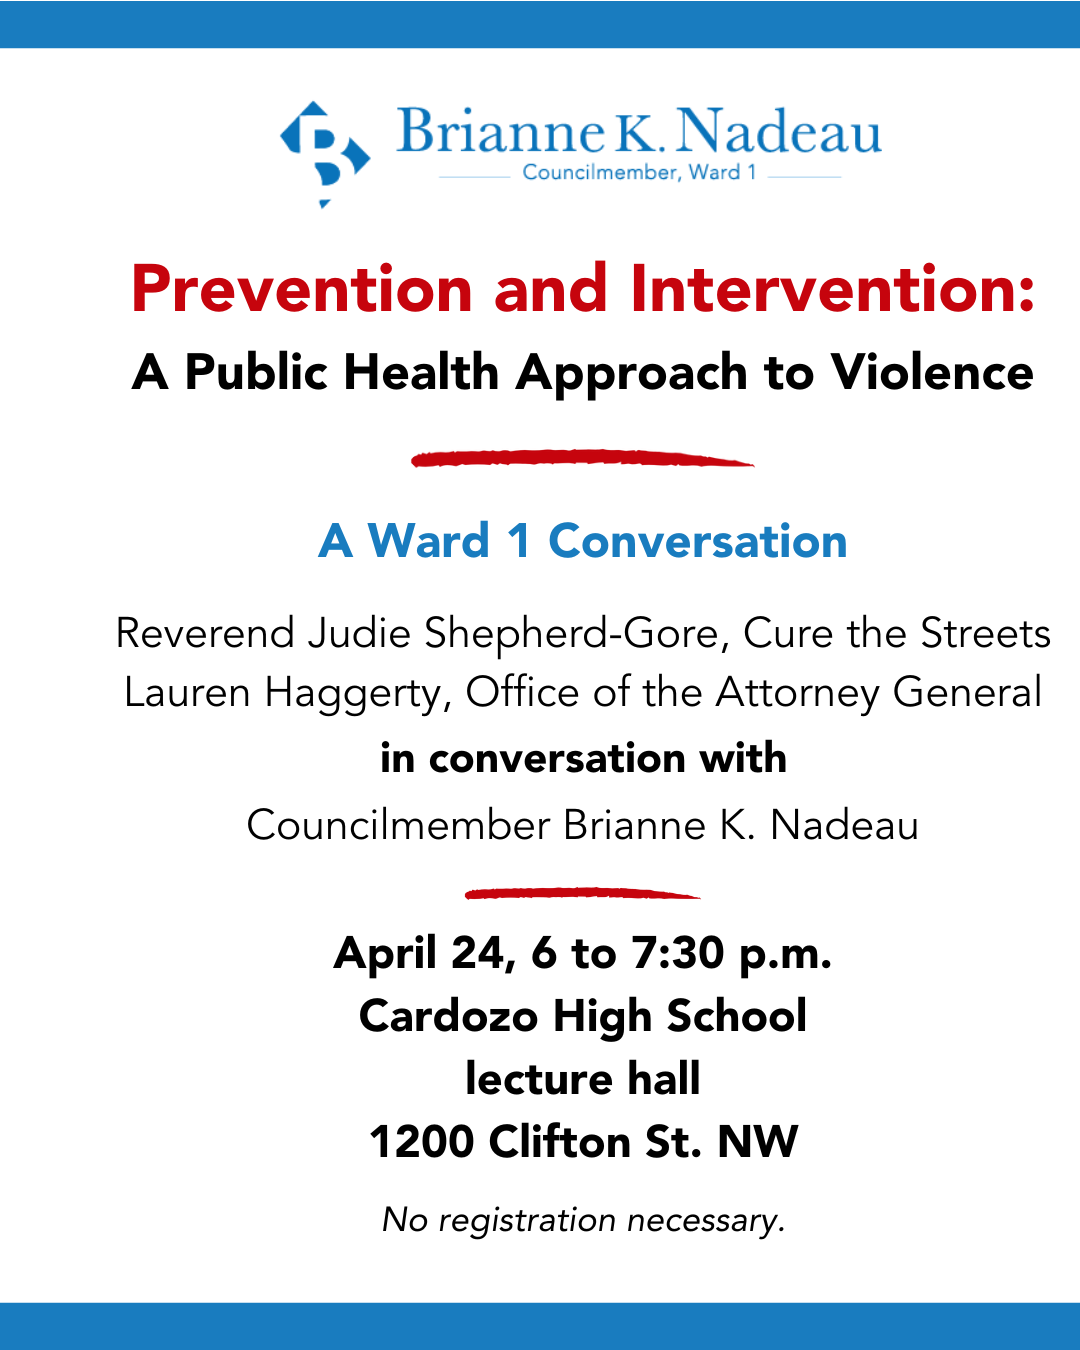 Prevention and Intervention: A Public Health Approach to Violence. Same details as in the body of the update.